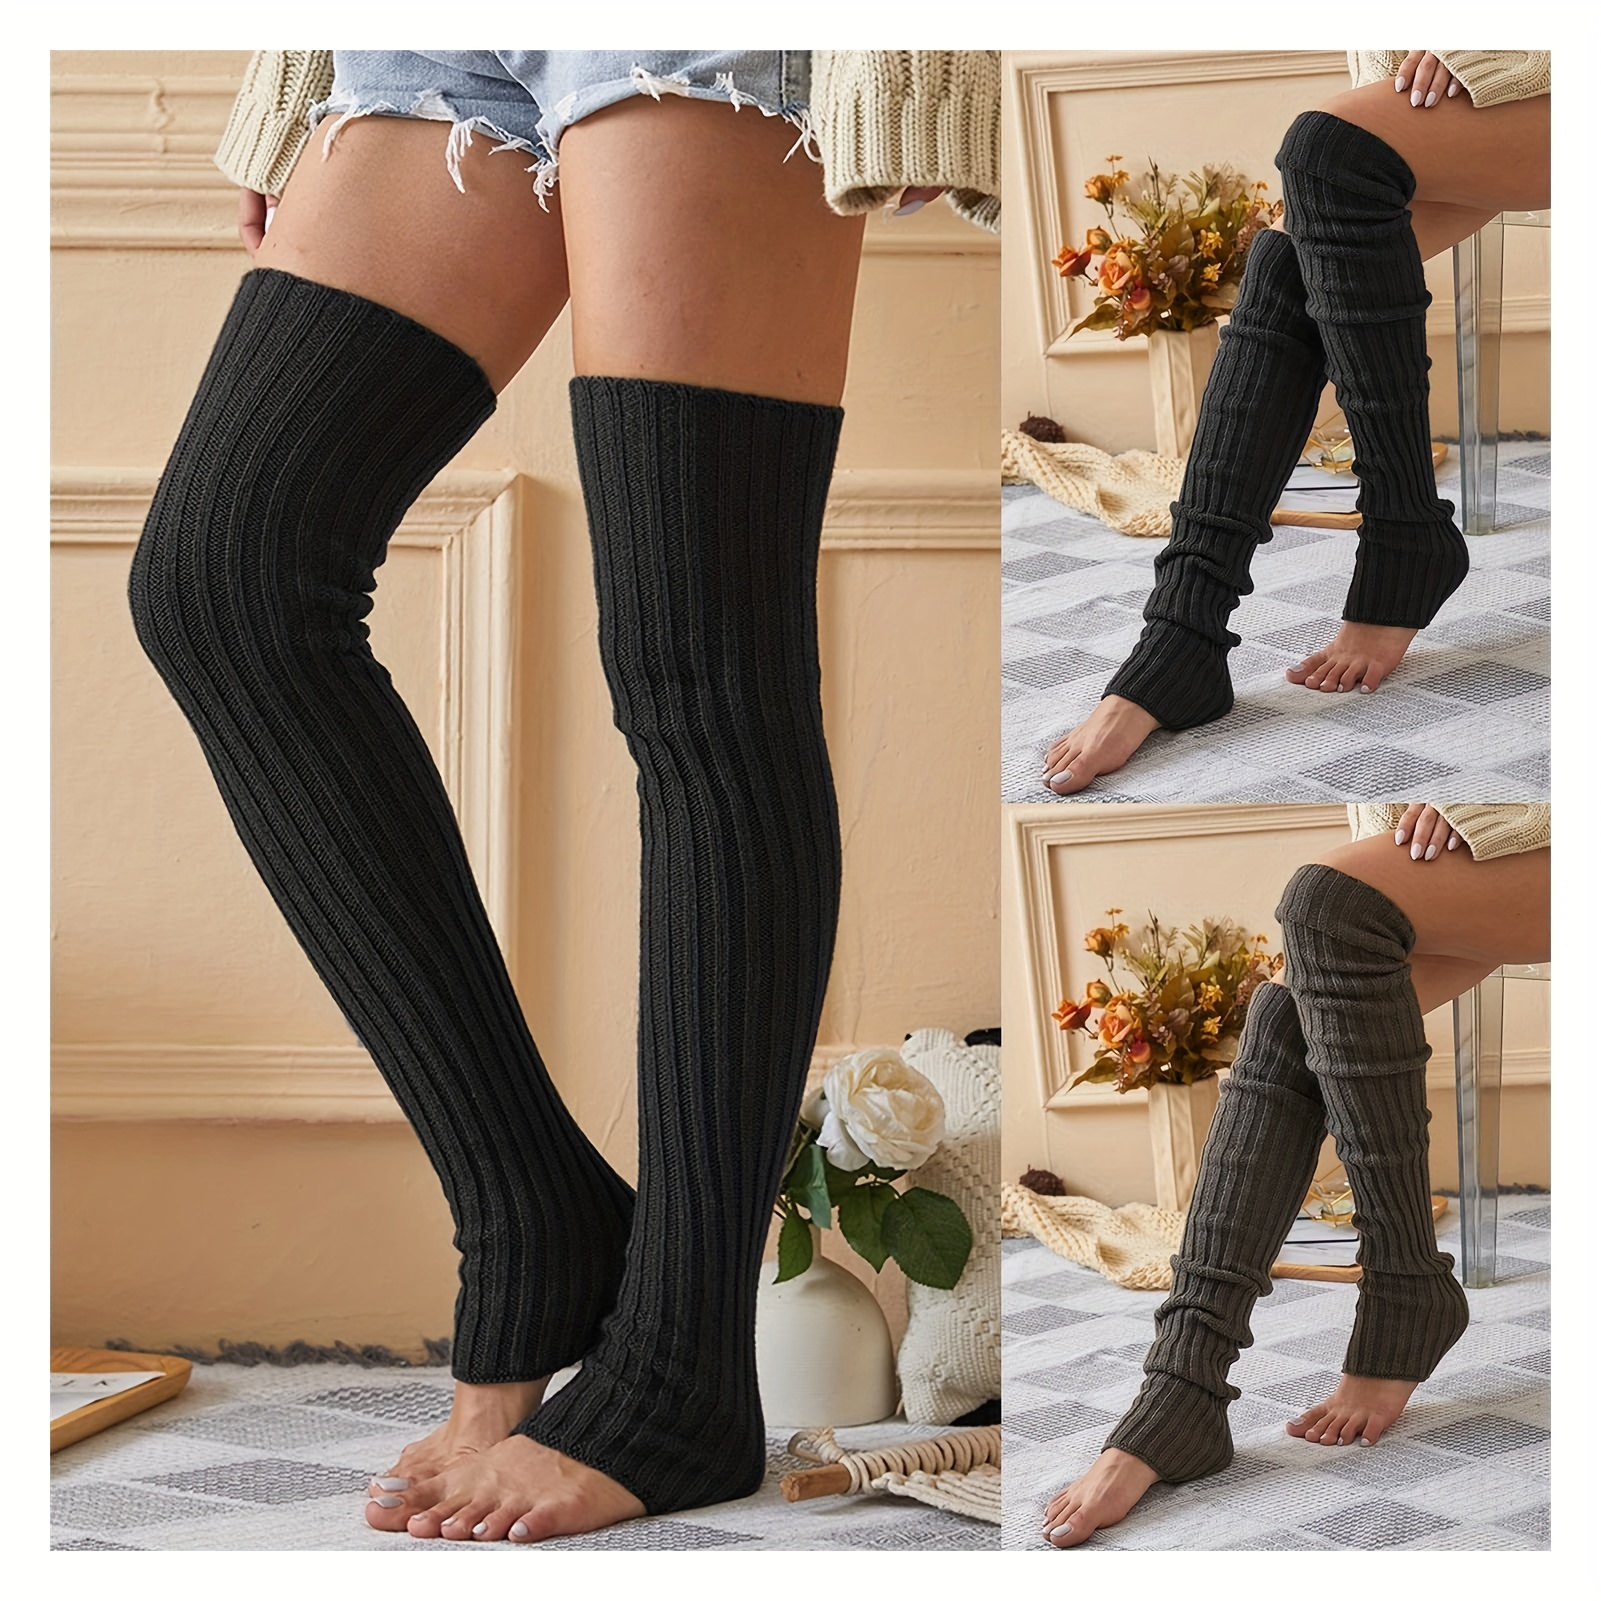 2 Pcs Tights Stockings Socks, Comfortable & Breathable Translucent Lined  Pants, Women's Stockings & Hosiery